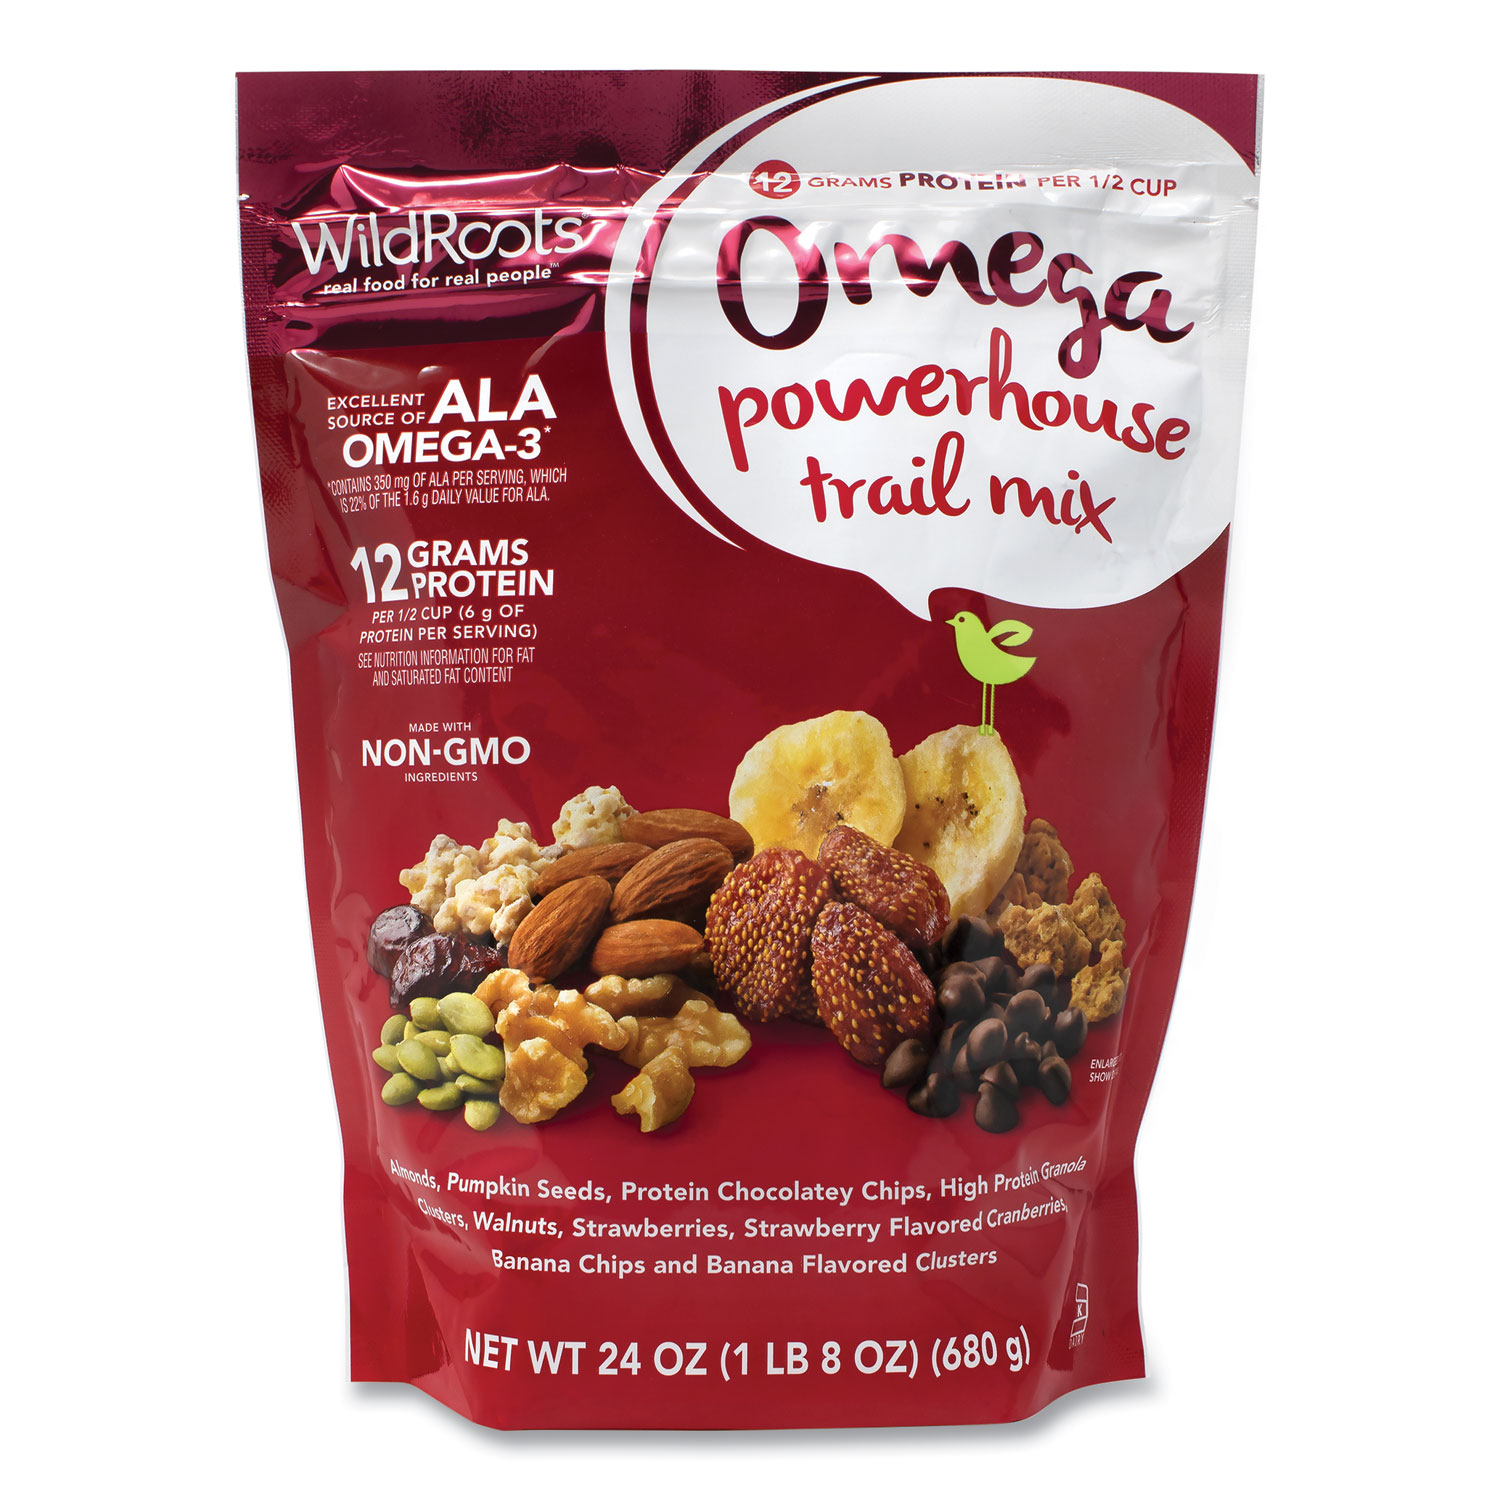  Wildroots 00039 Omega Powerhouse Train Mix, 24 oz Bag, Free Delivery in 1-4 Business Days (GRR22001162) 